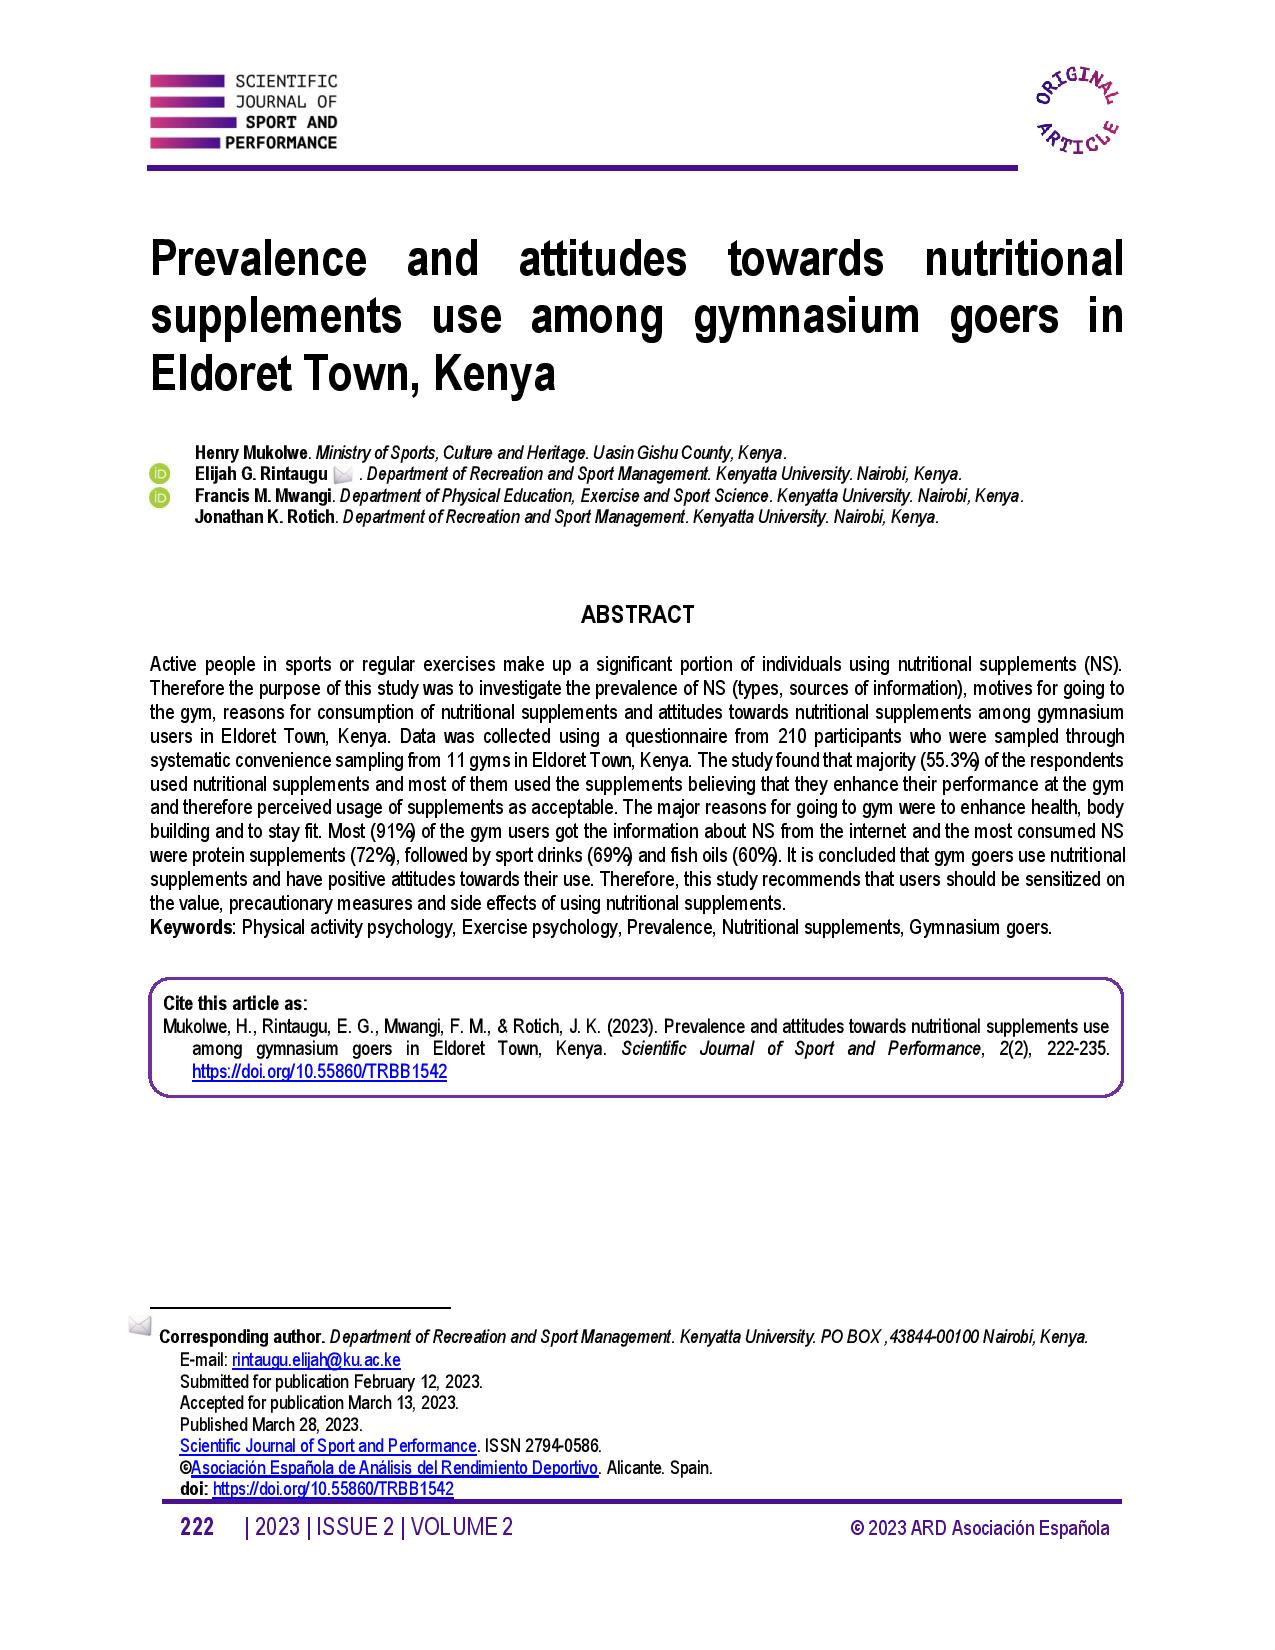 Prevalence and attitudes towards nutritional supplements use among gymnasium goers in Eldoret Town, Kenya